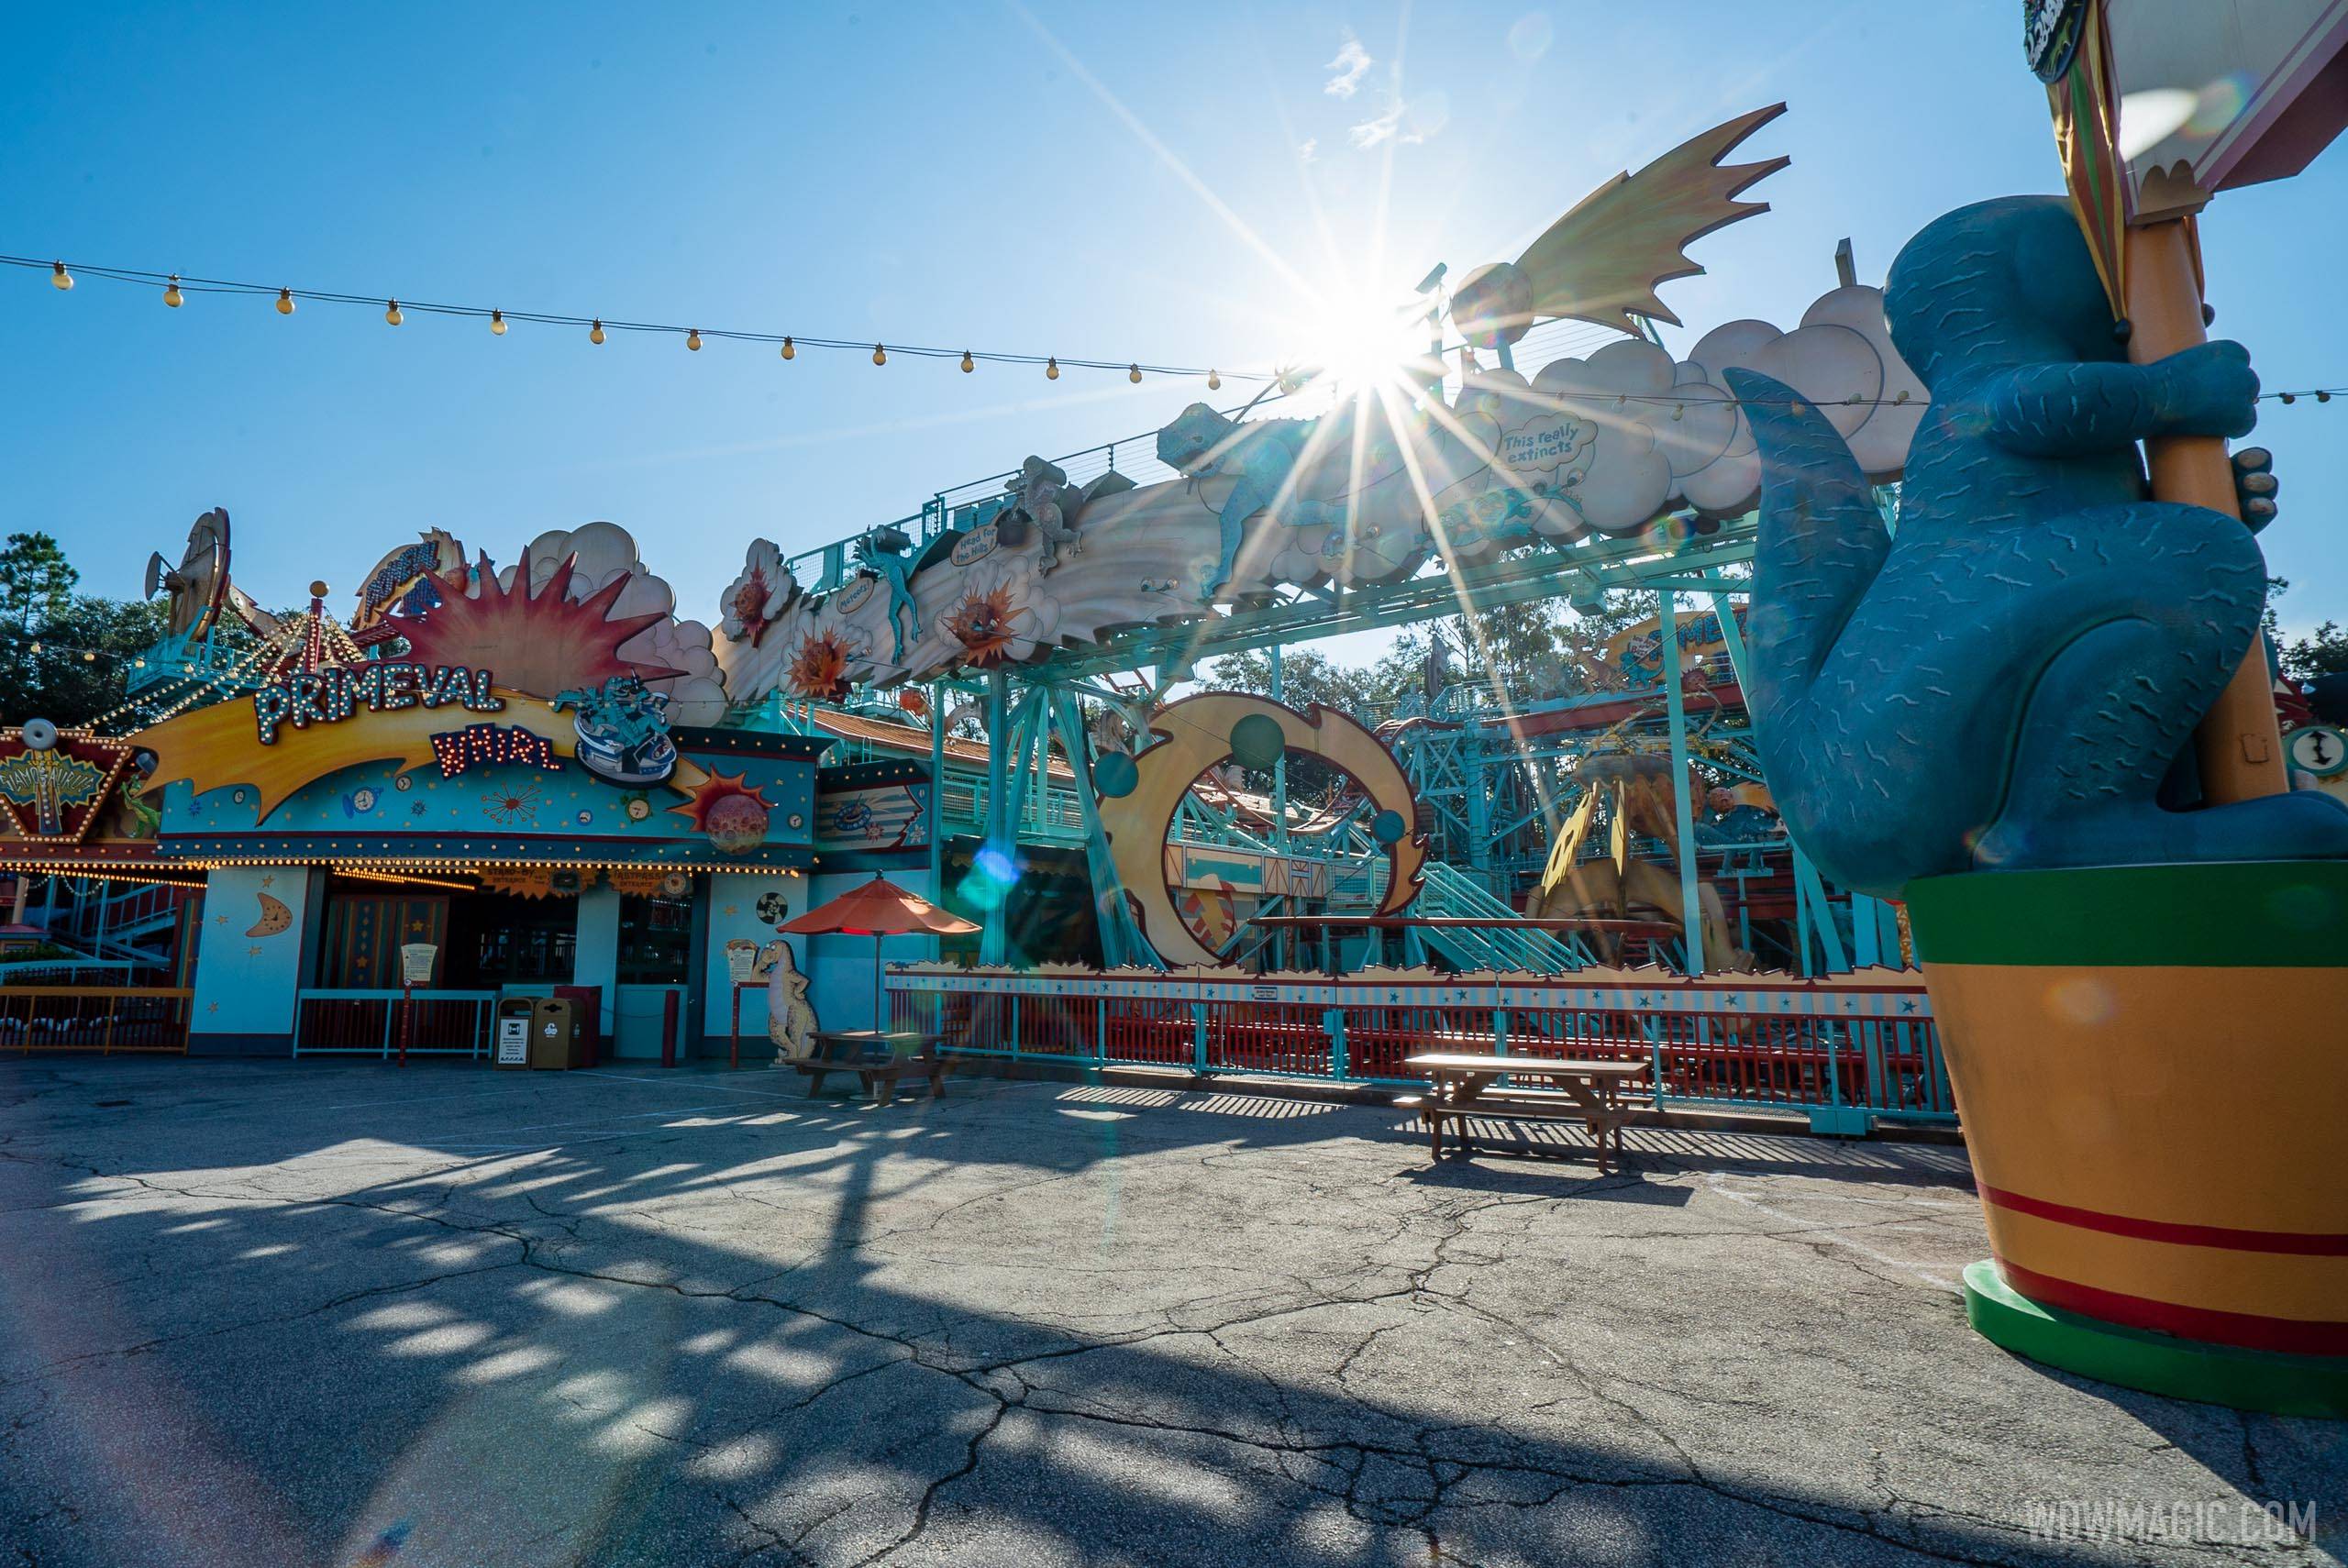 Primeval Whirl, Stitch's Great Escape and Rivers of Light are now permanently closed